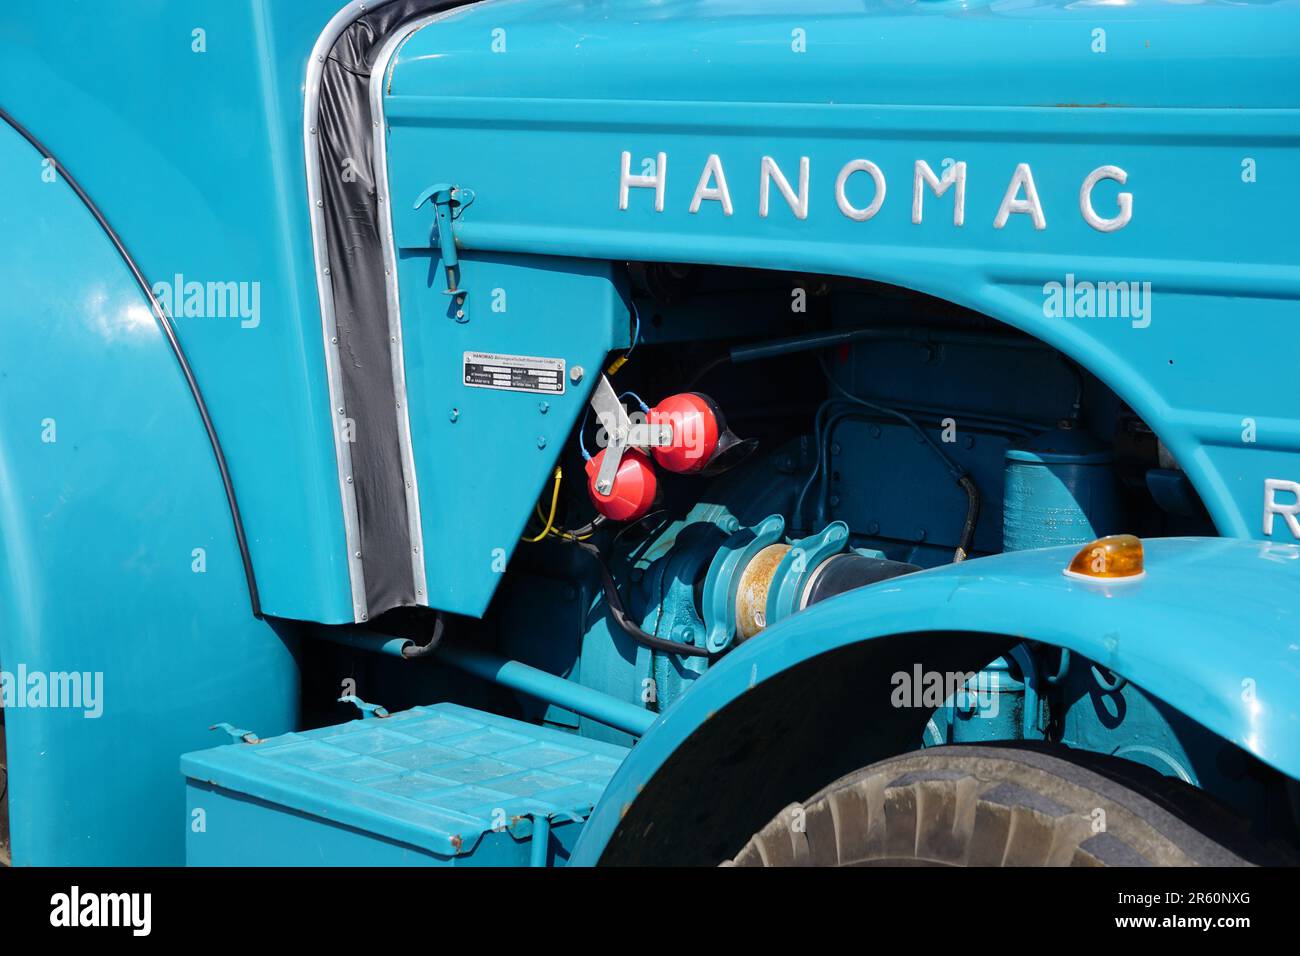 A blue Hanomag tractor in sunlight Stock Photo